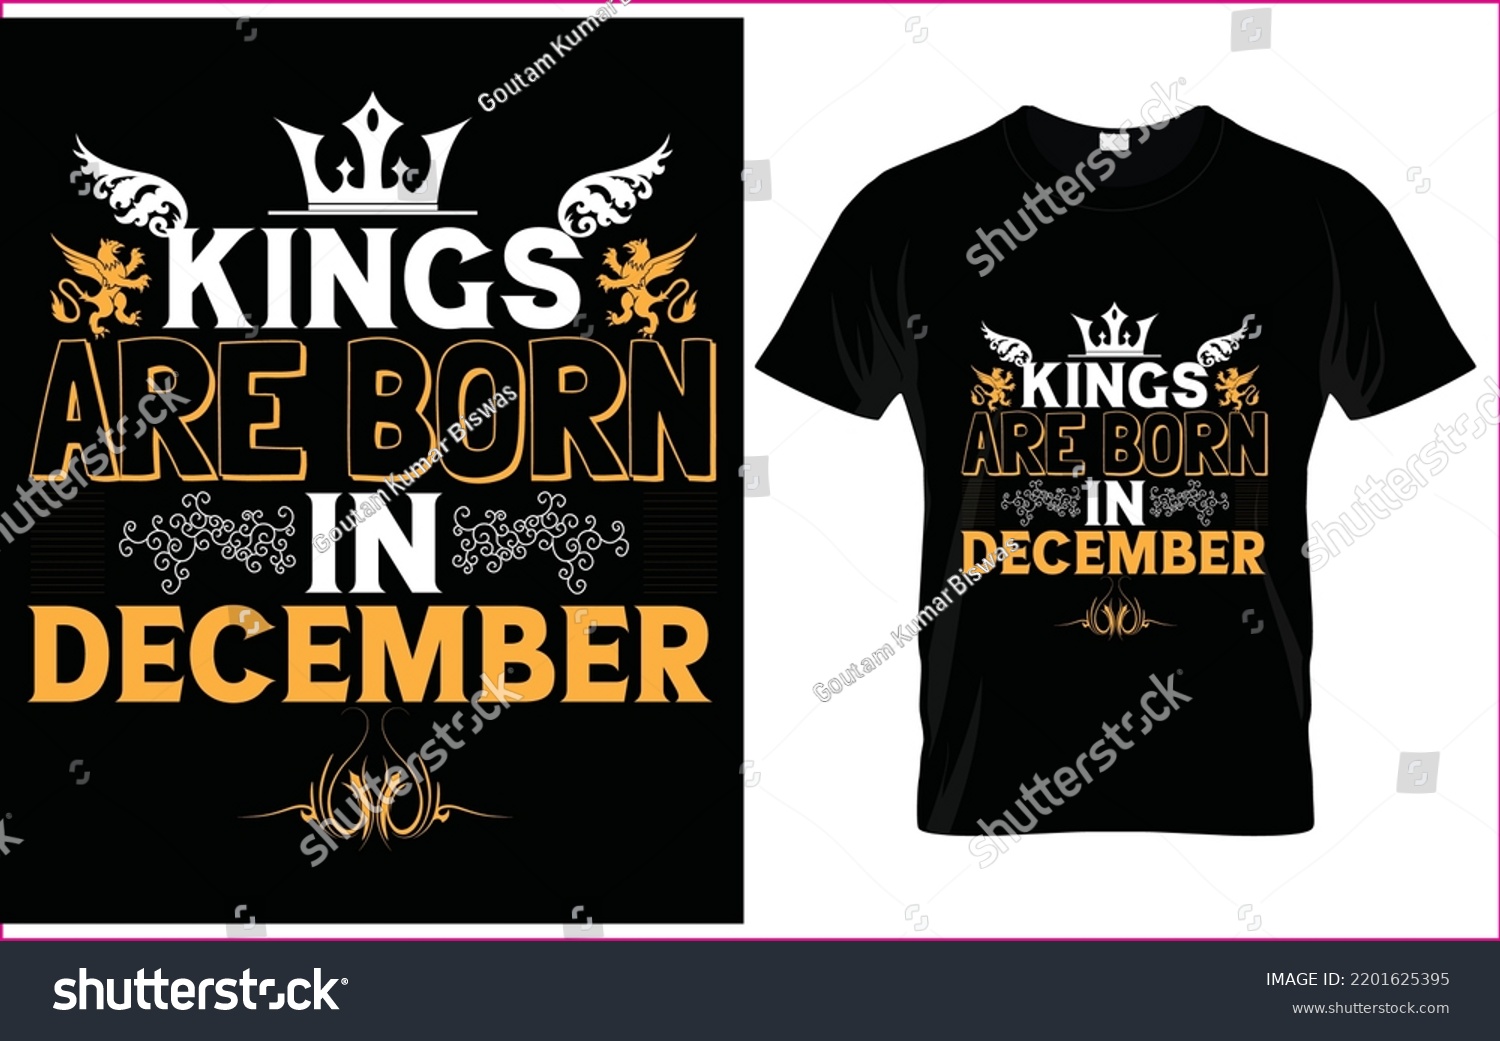 SVG of Kings are born in December tshirt desgin template vector for tshirt printing.  svg